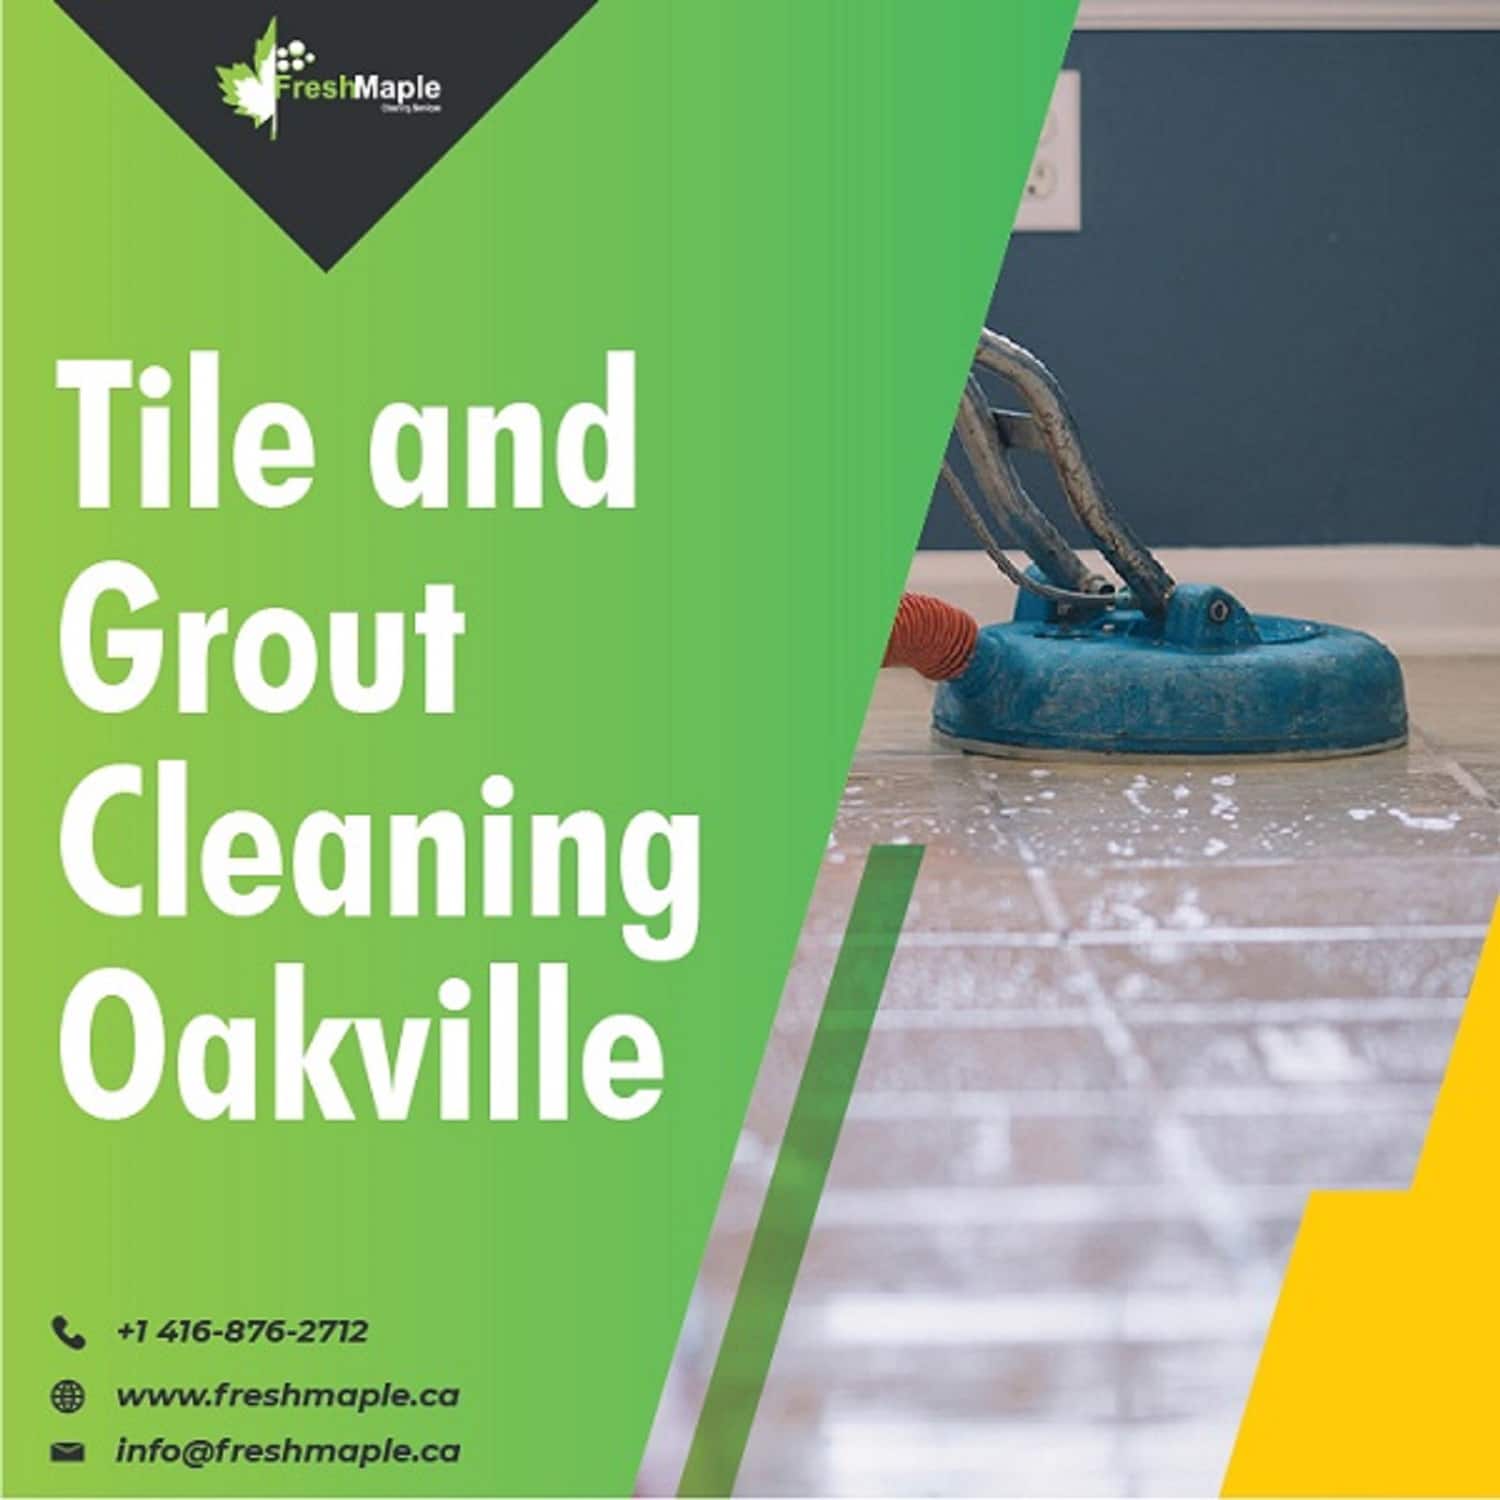 Tile_and_Grout_Cleaning_Oakville-04-6a6210bc